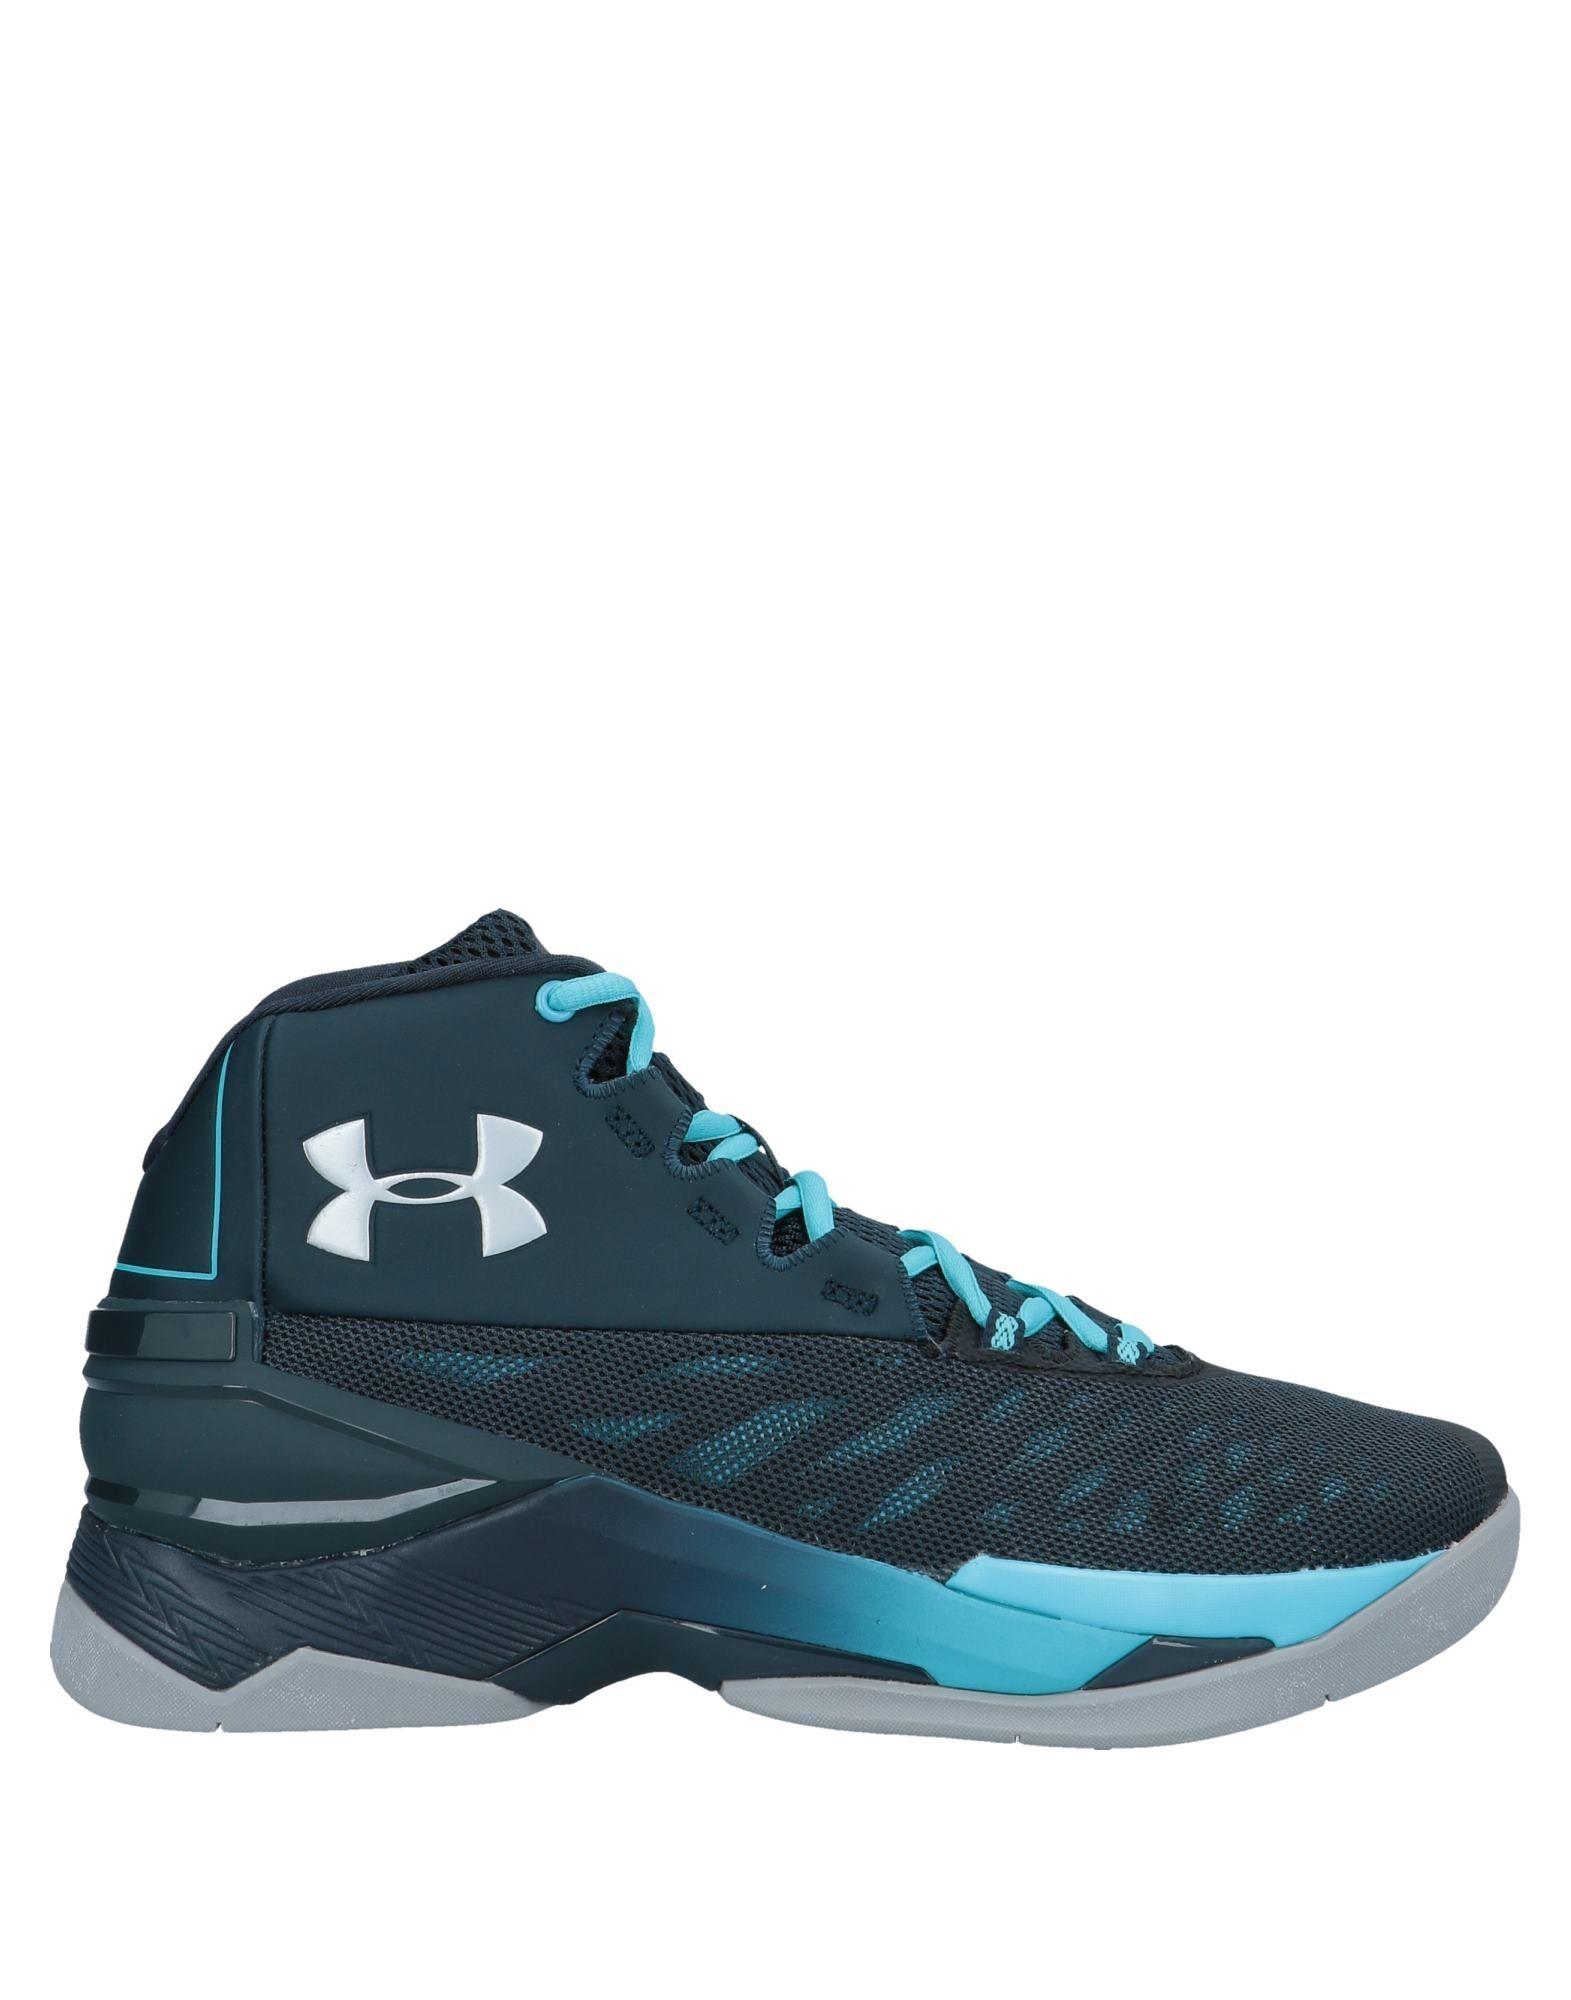 Under Armour High-tops & Sneakers in Dark Blue (Blue) for Men - Lyst